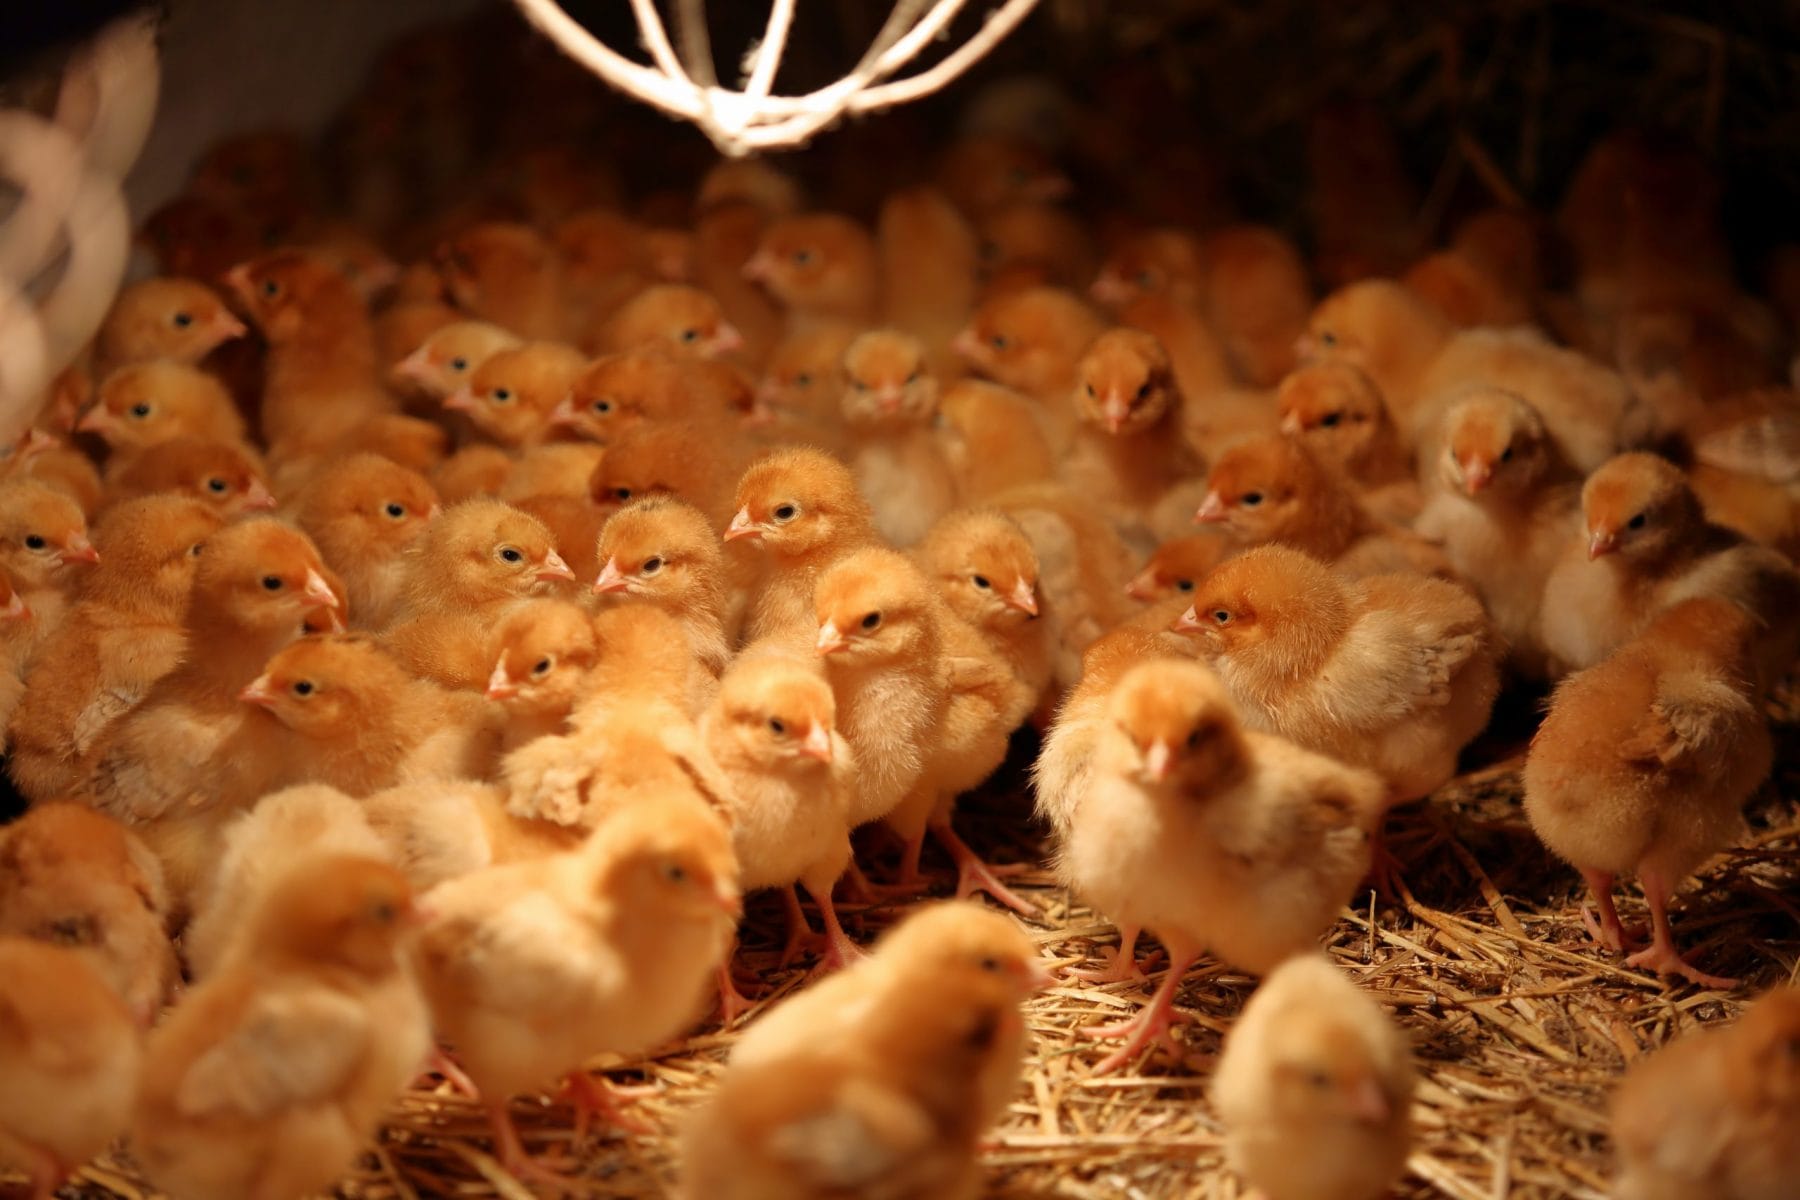 Getting Heated: Why Heat Lamps Outshine Brooder Plates for Mail-Order Poultry